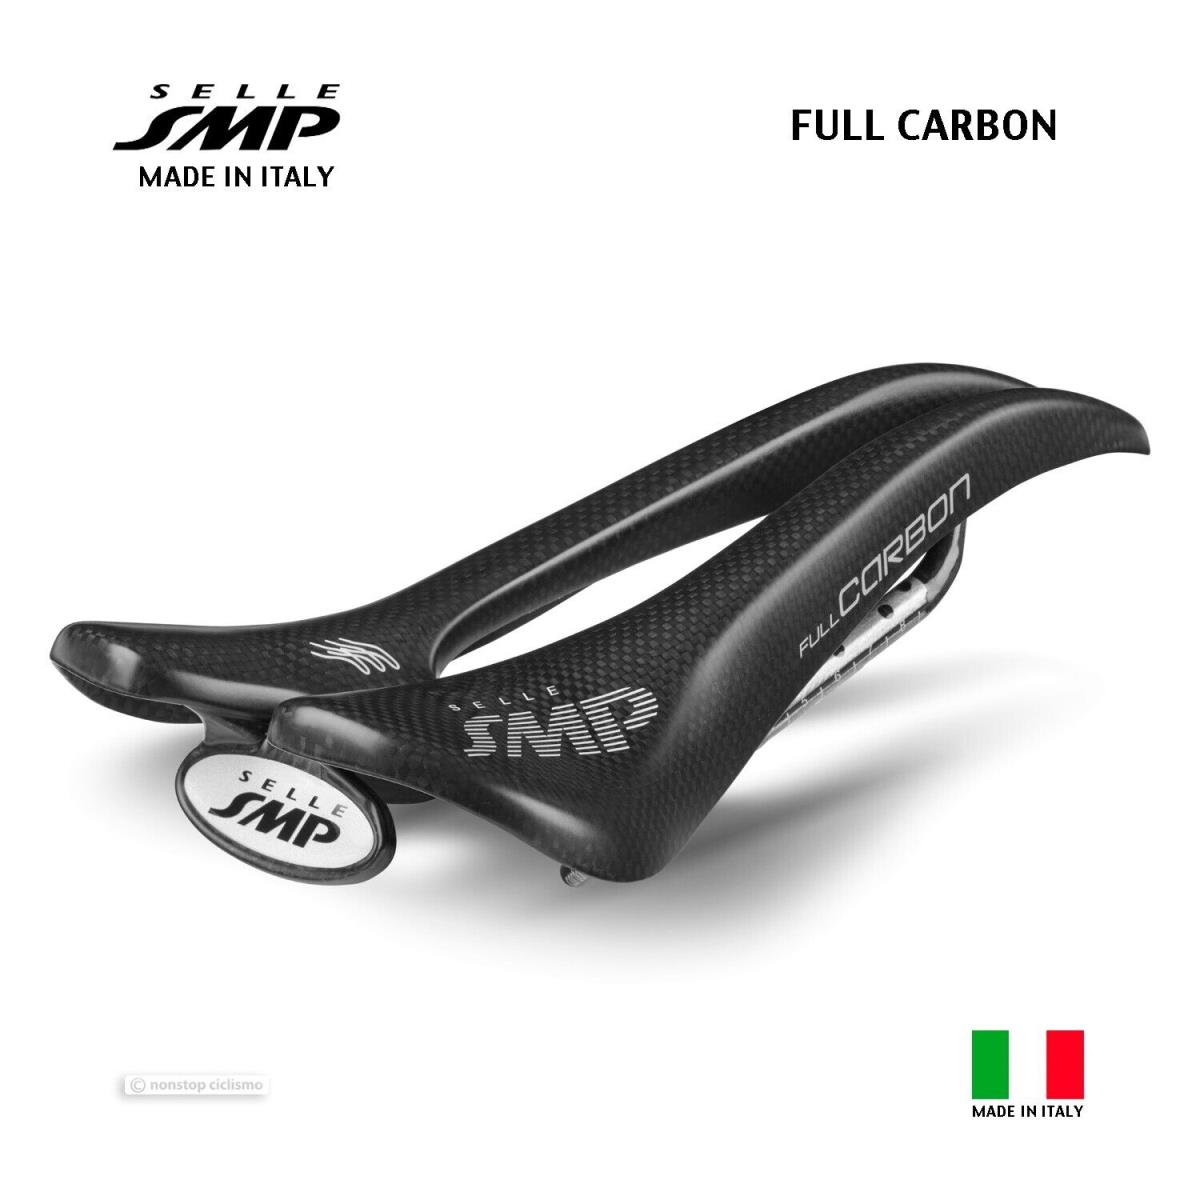 Selle Smp Full Carbon Saddle - Made IN Italy